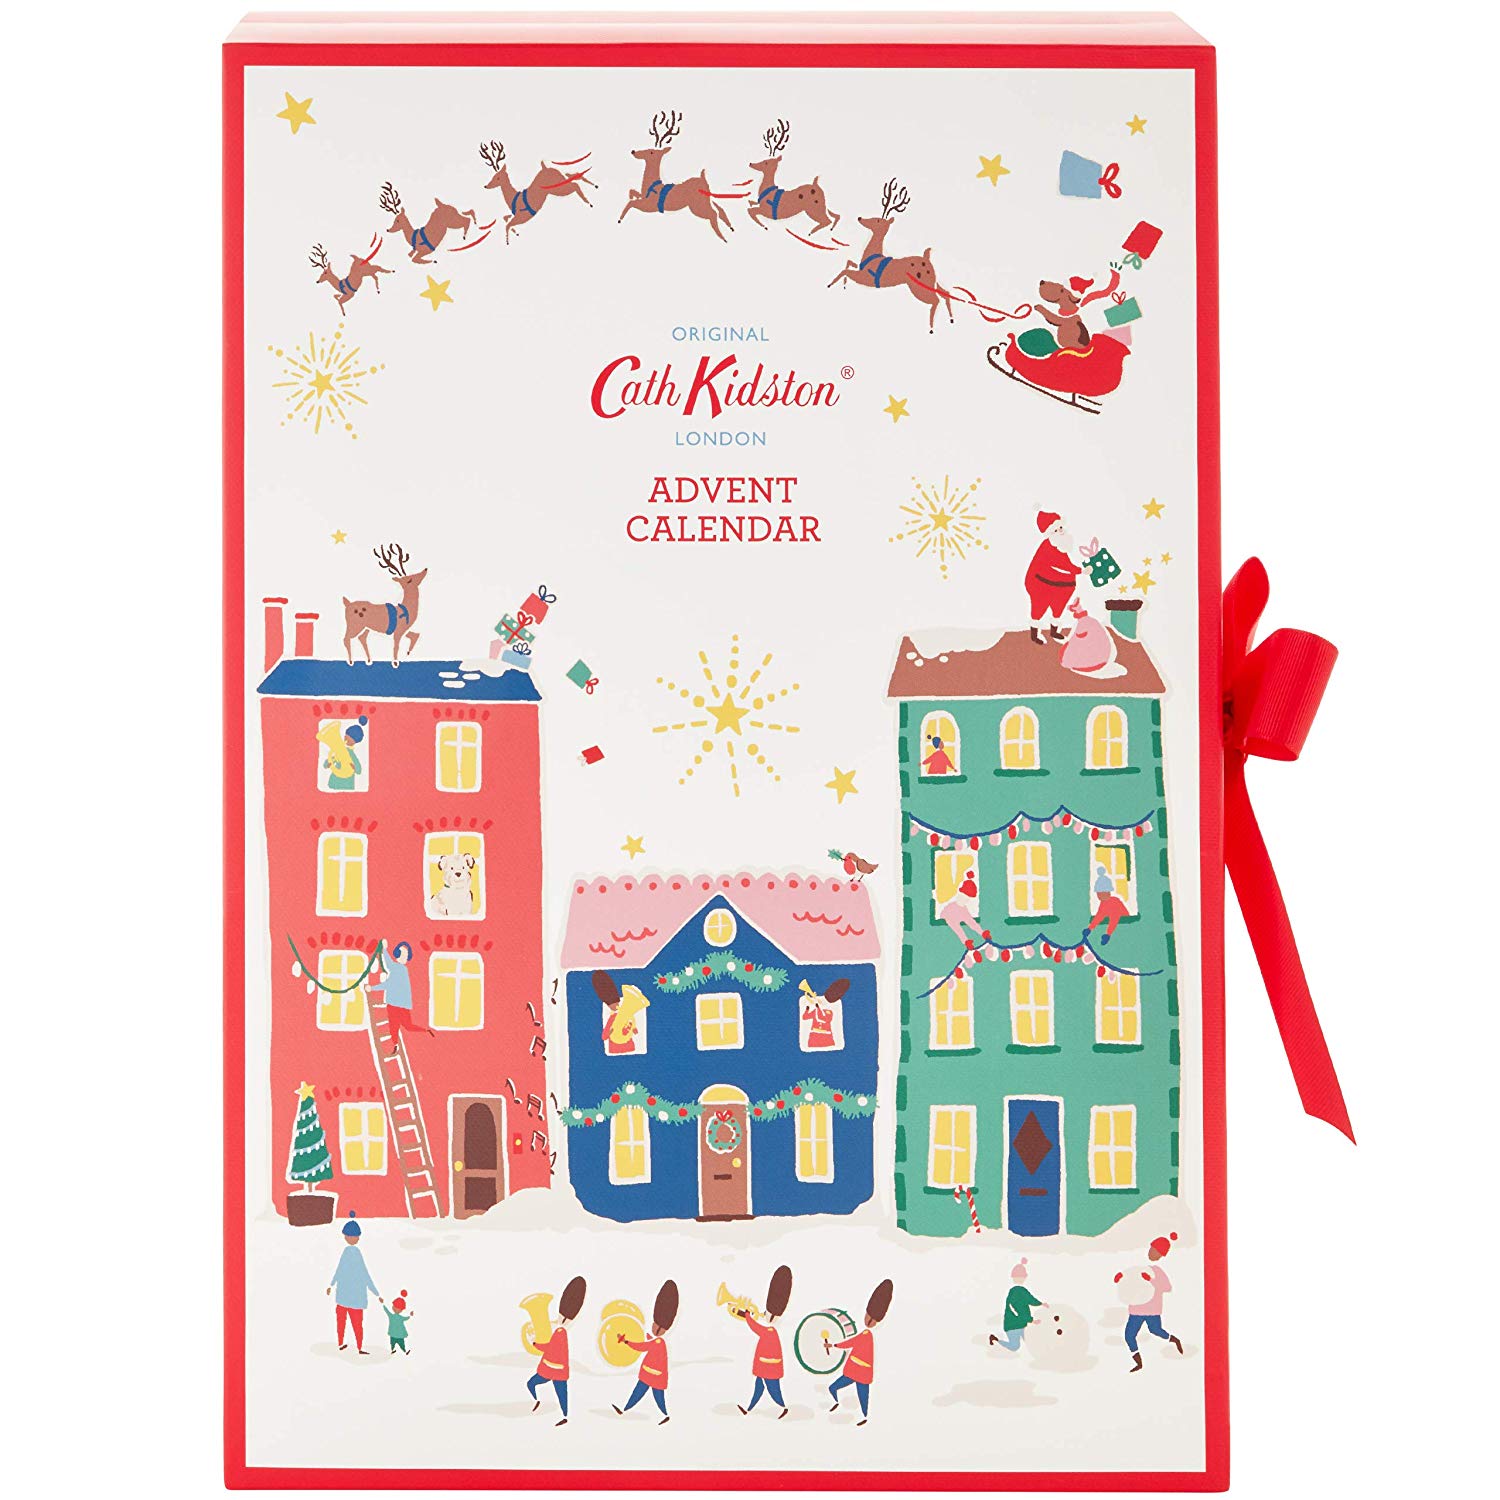 Cath Kidston Advent Calendar Reviews Get All The Details At Hello